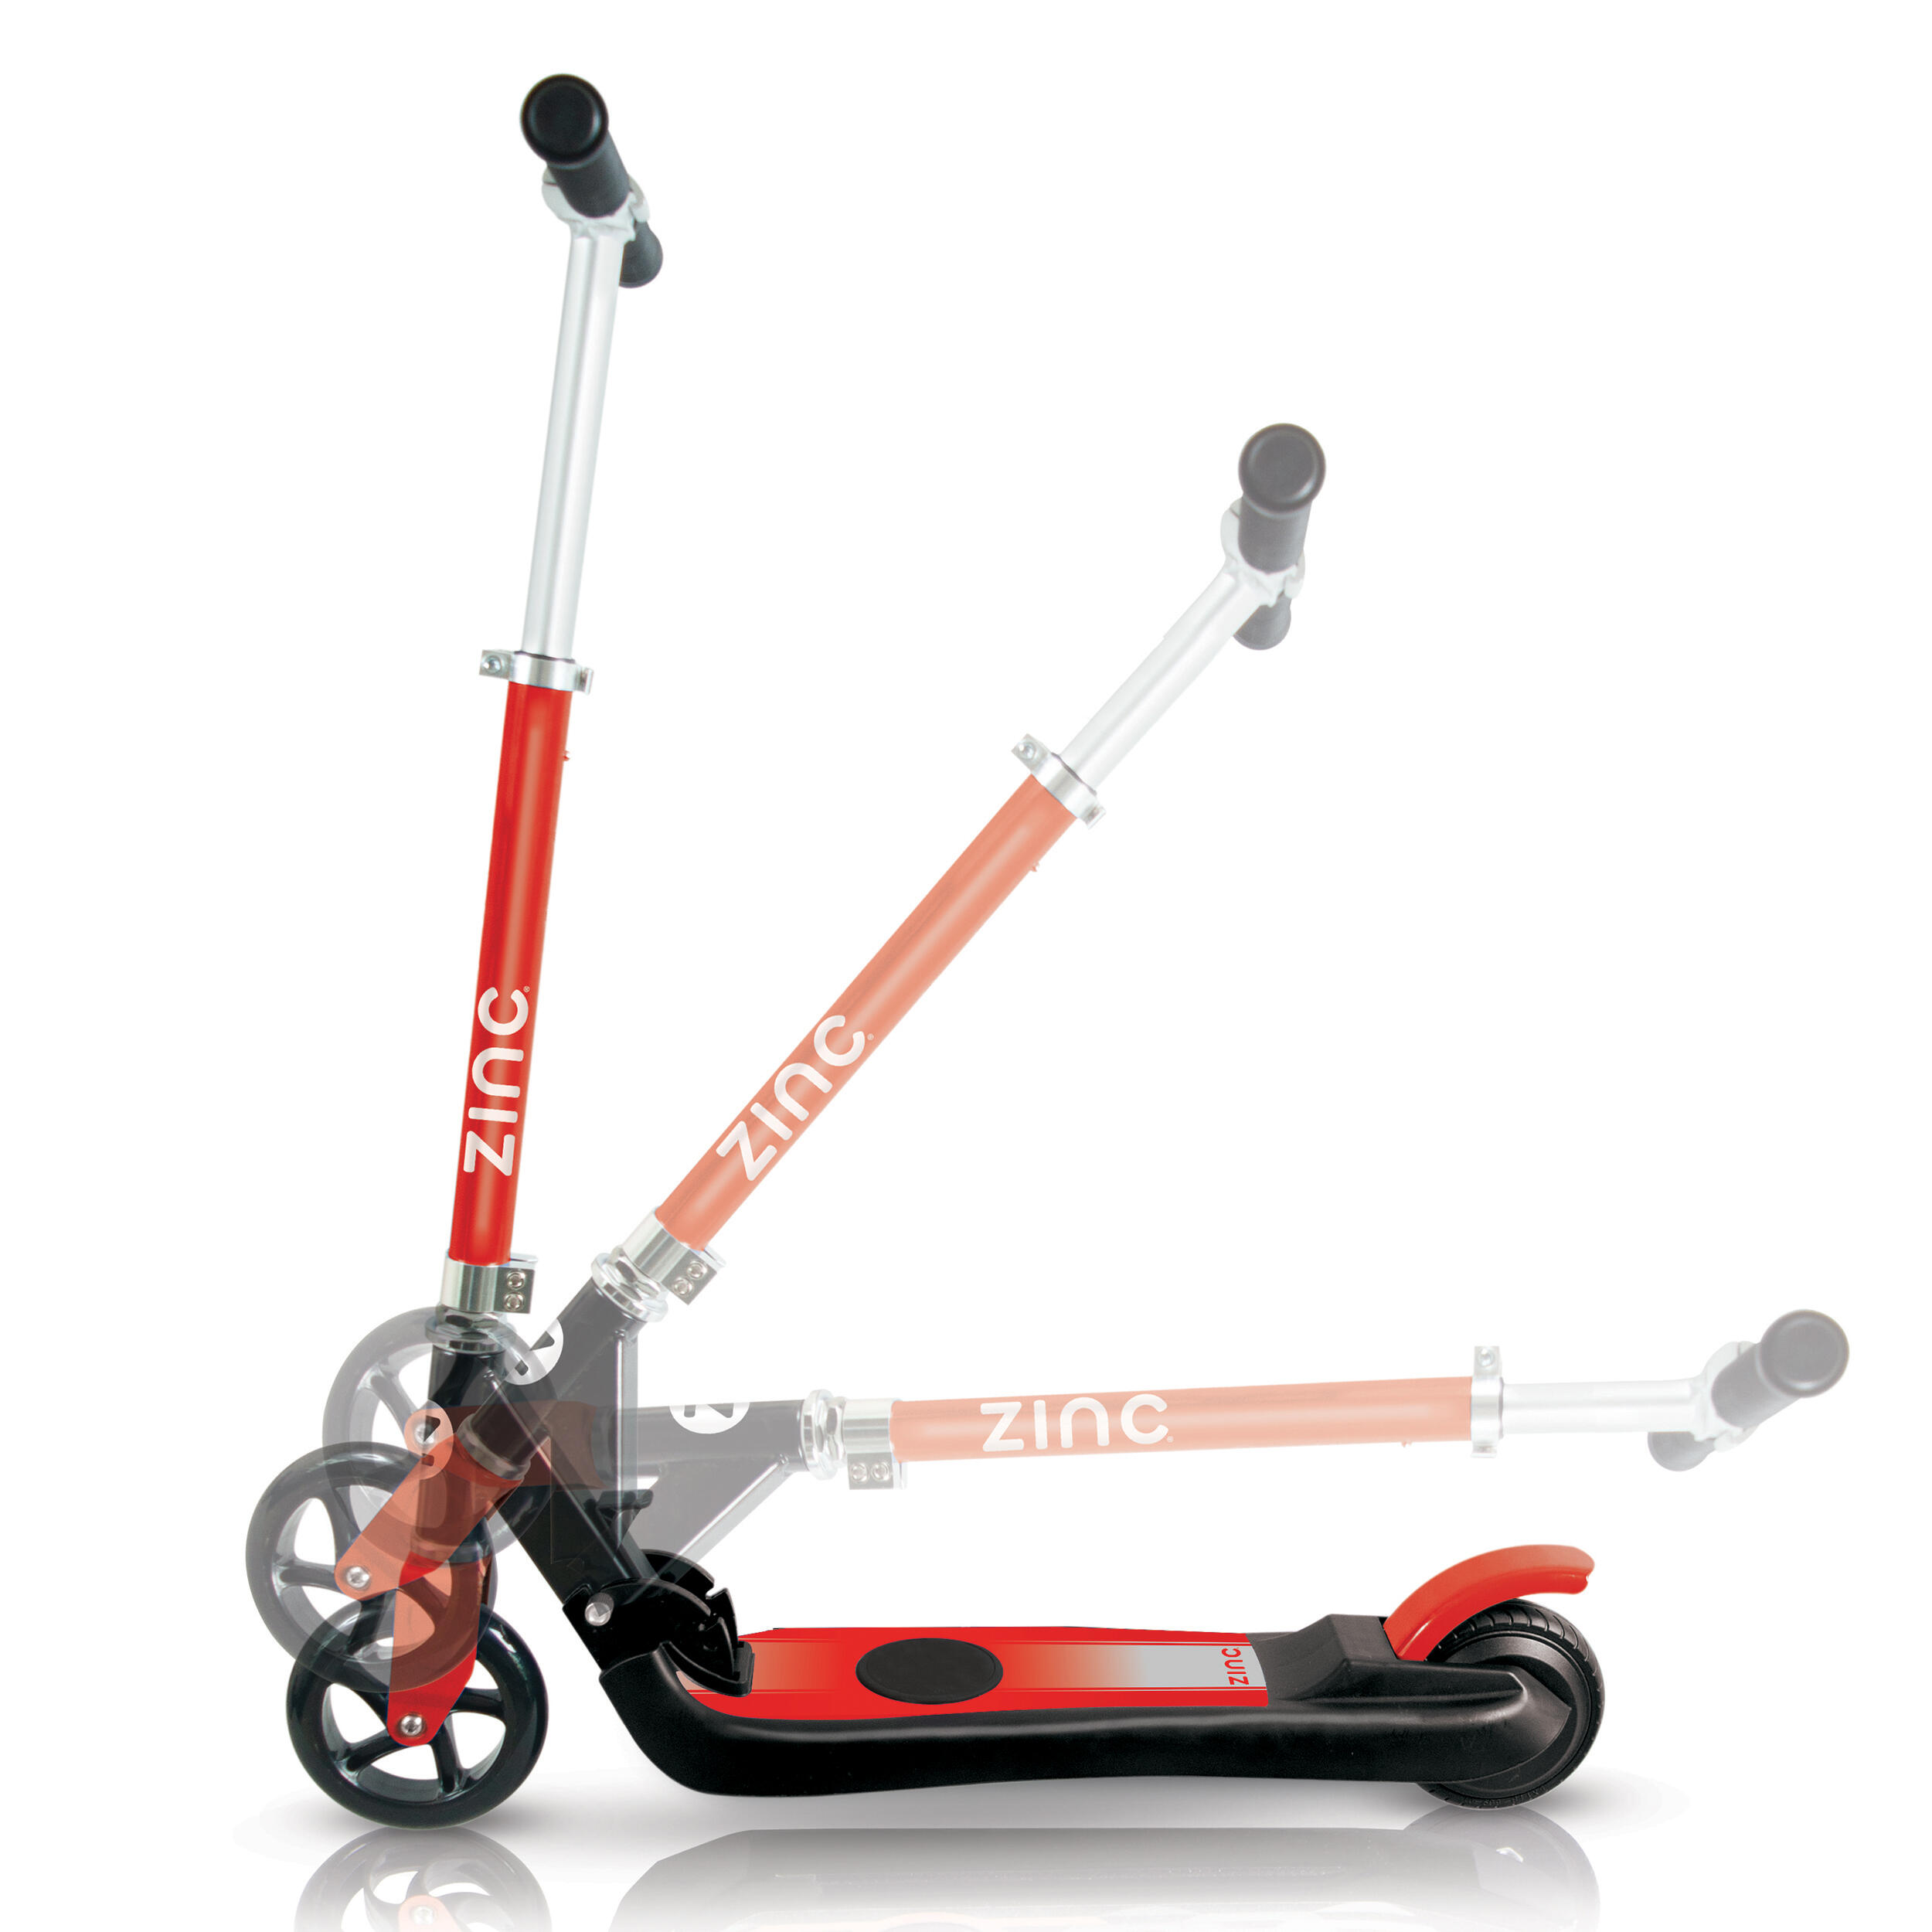 Zinc e4 electric scooter - Red 2/3